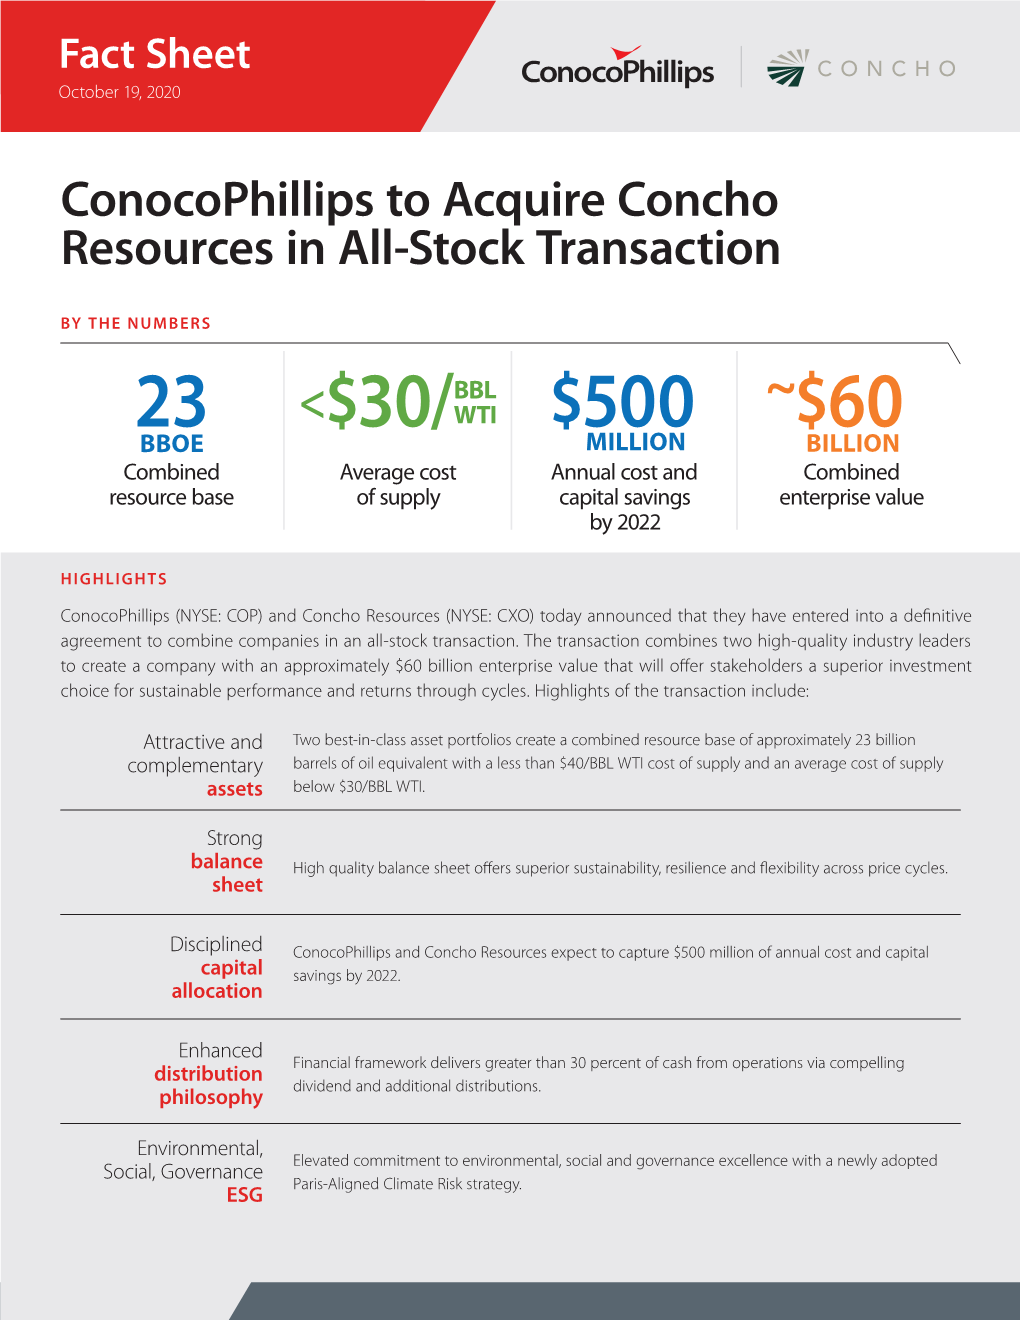 Conocophillips to Acquire Concho Resources in All-Stock Transaction